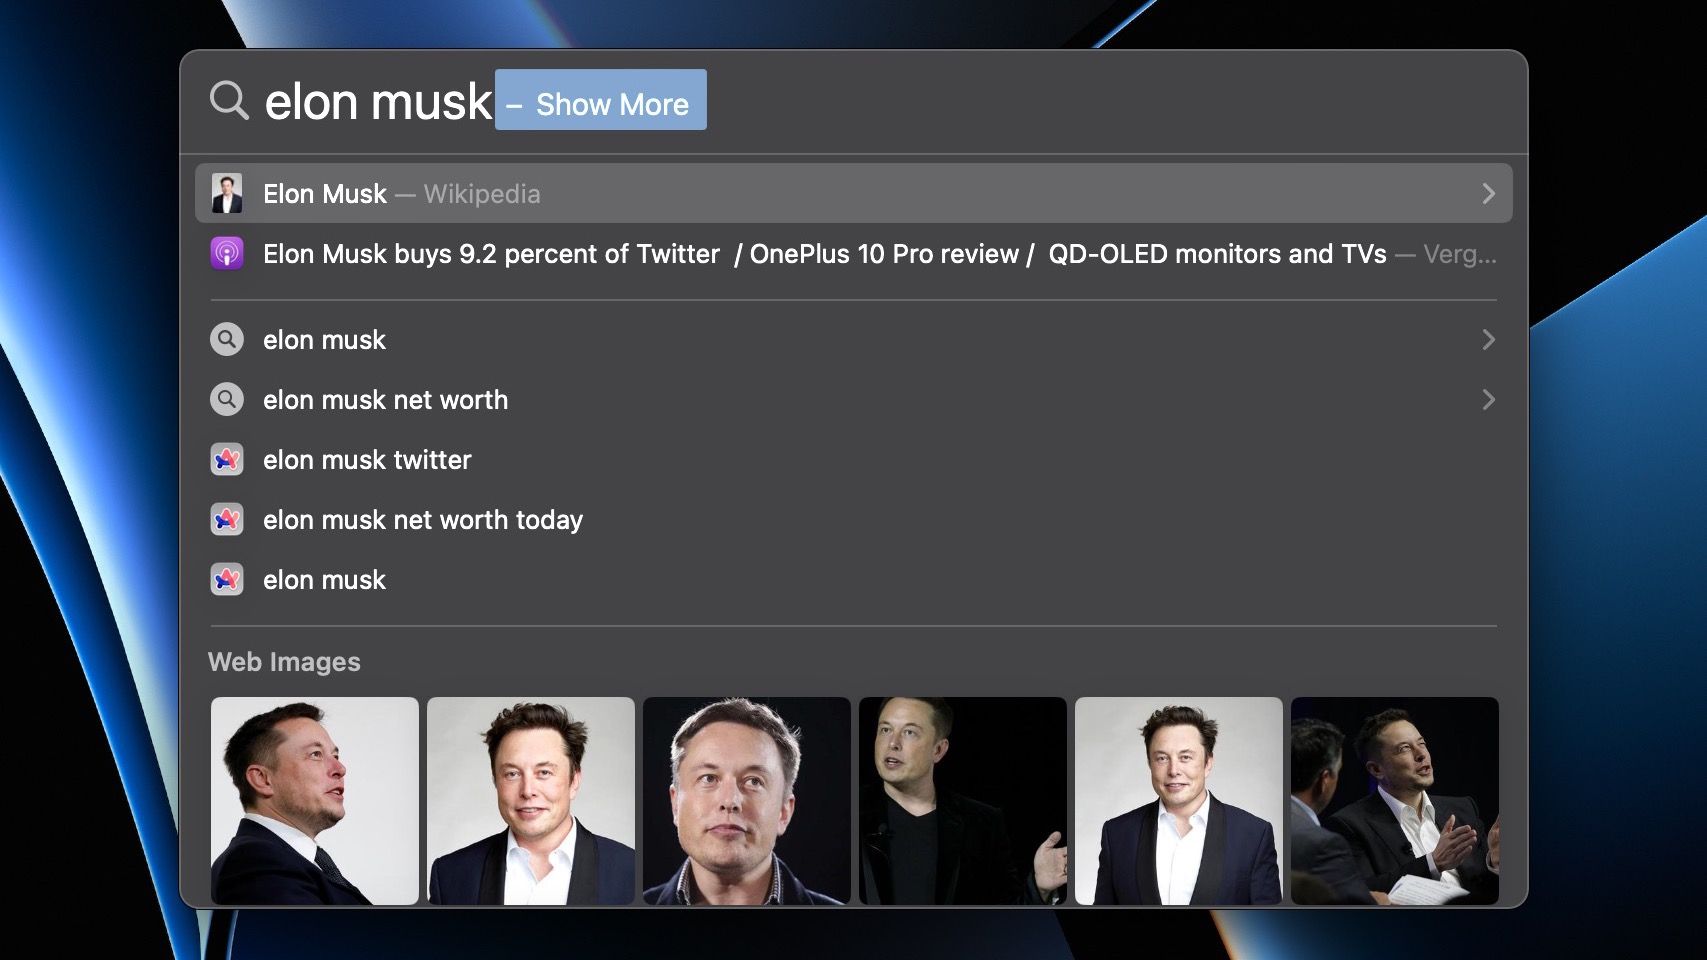 Spotlight showing web results for Elon Musk search term